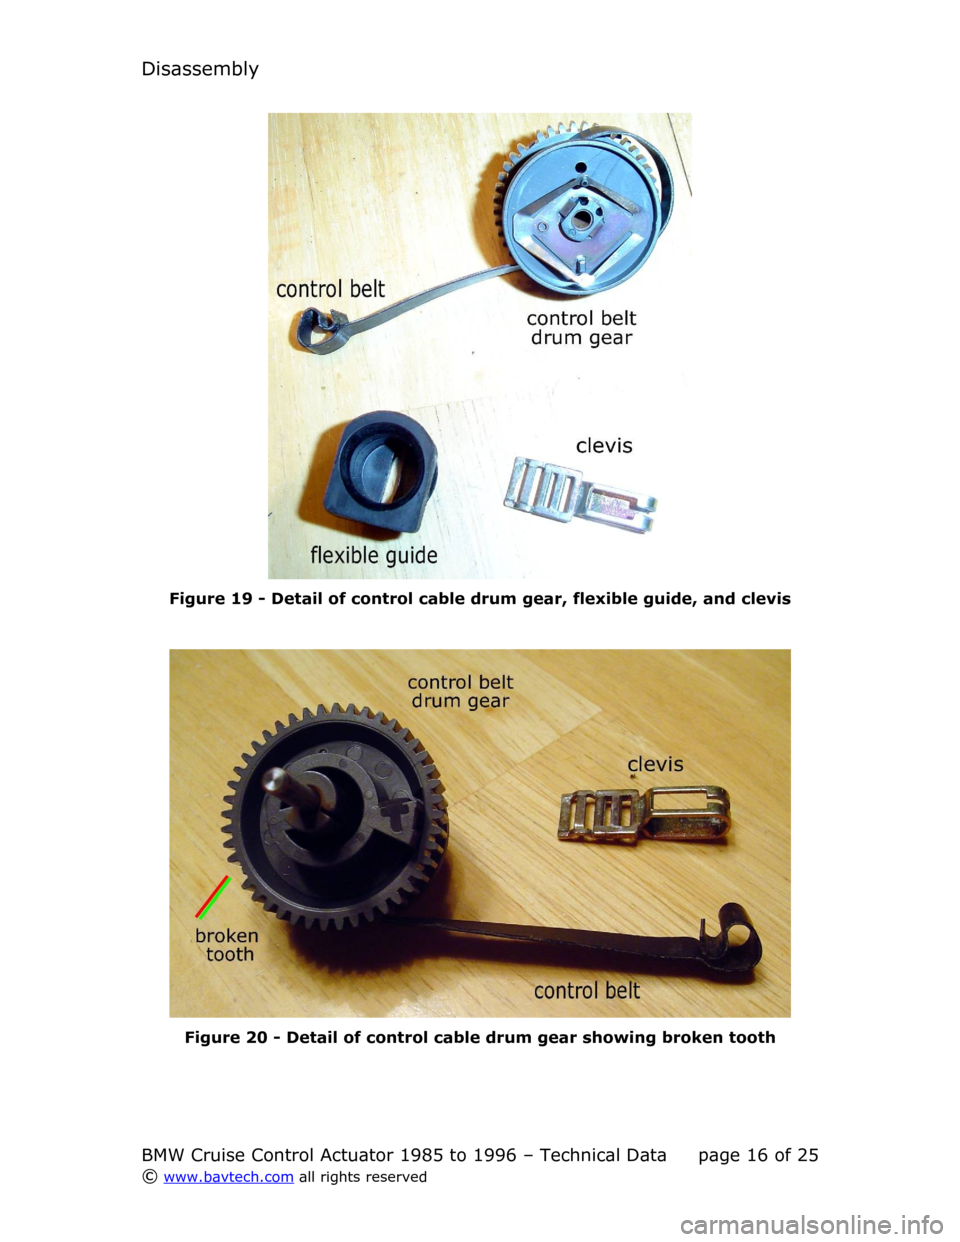 BMW 5 SERIES 1991 E34 Cruise Control Acutator Disassembly
Figure  19  - Detail of control cable drum gear, flexible guide, and clevis
Figure  20  - Detail of control cable drum gear showing broken tooth
BMW Cruise Control Actuator 1985 to 1996 �